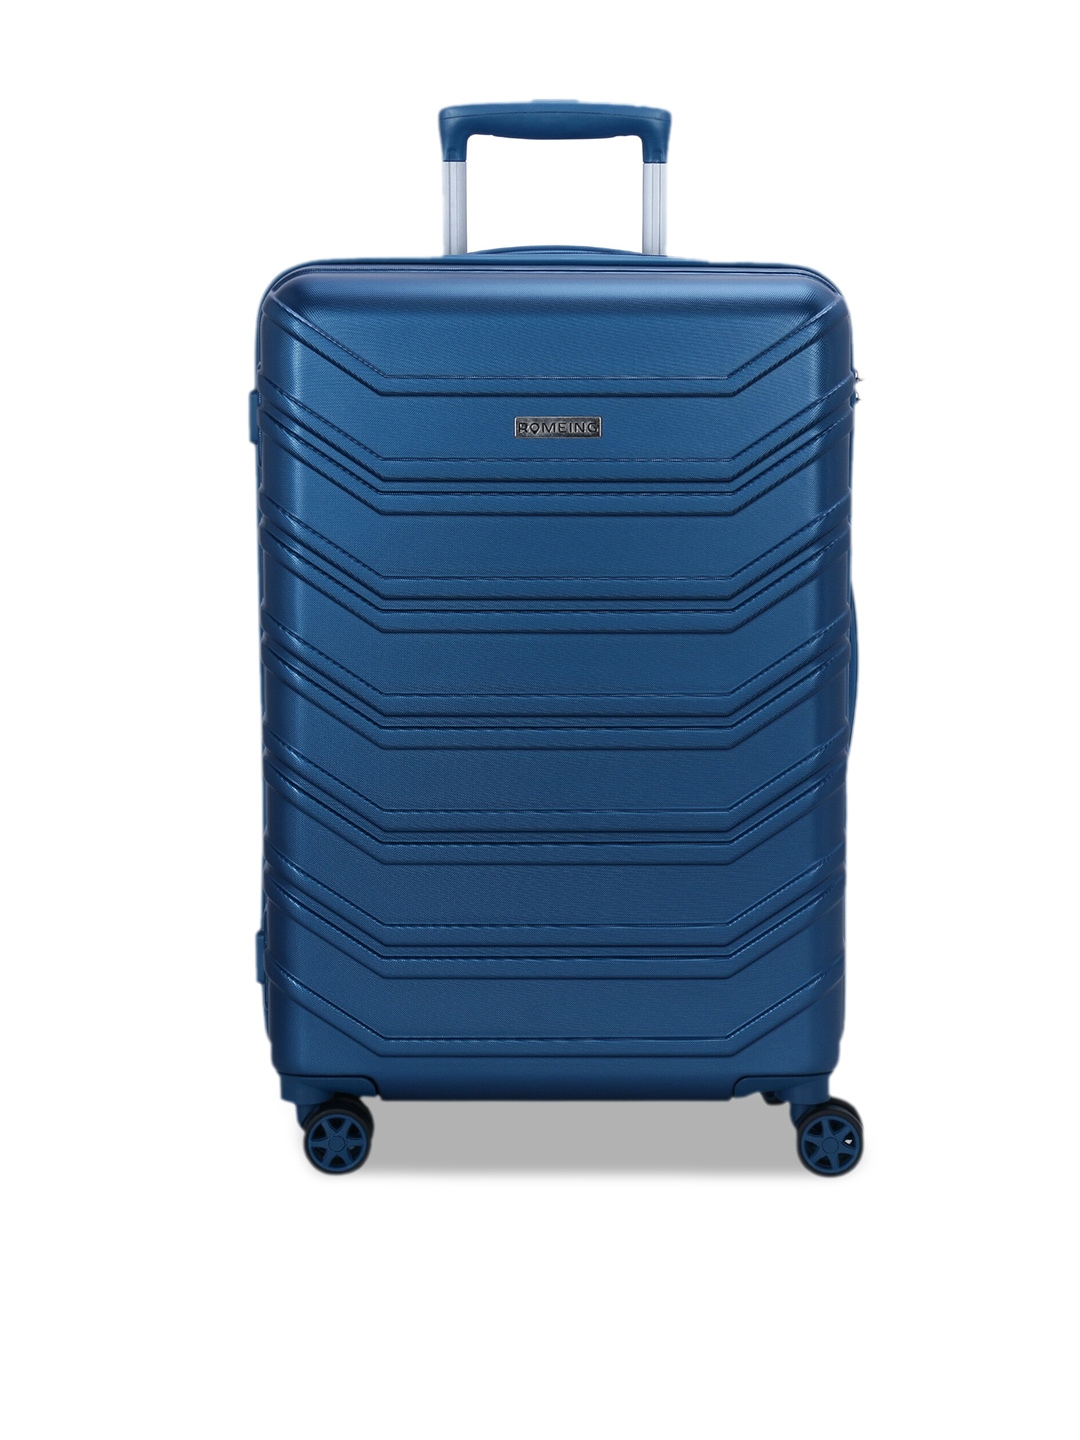 ROMEING Monopoli Navy Blue Textured Hard Sided Polycarbonate Medium Trolley Bag Price in India